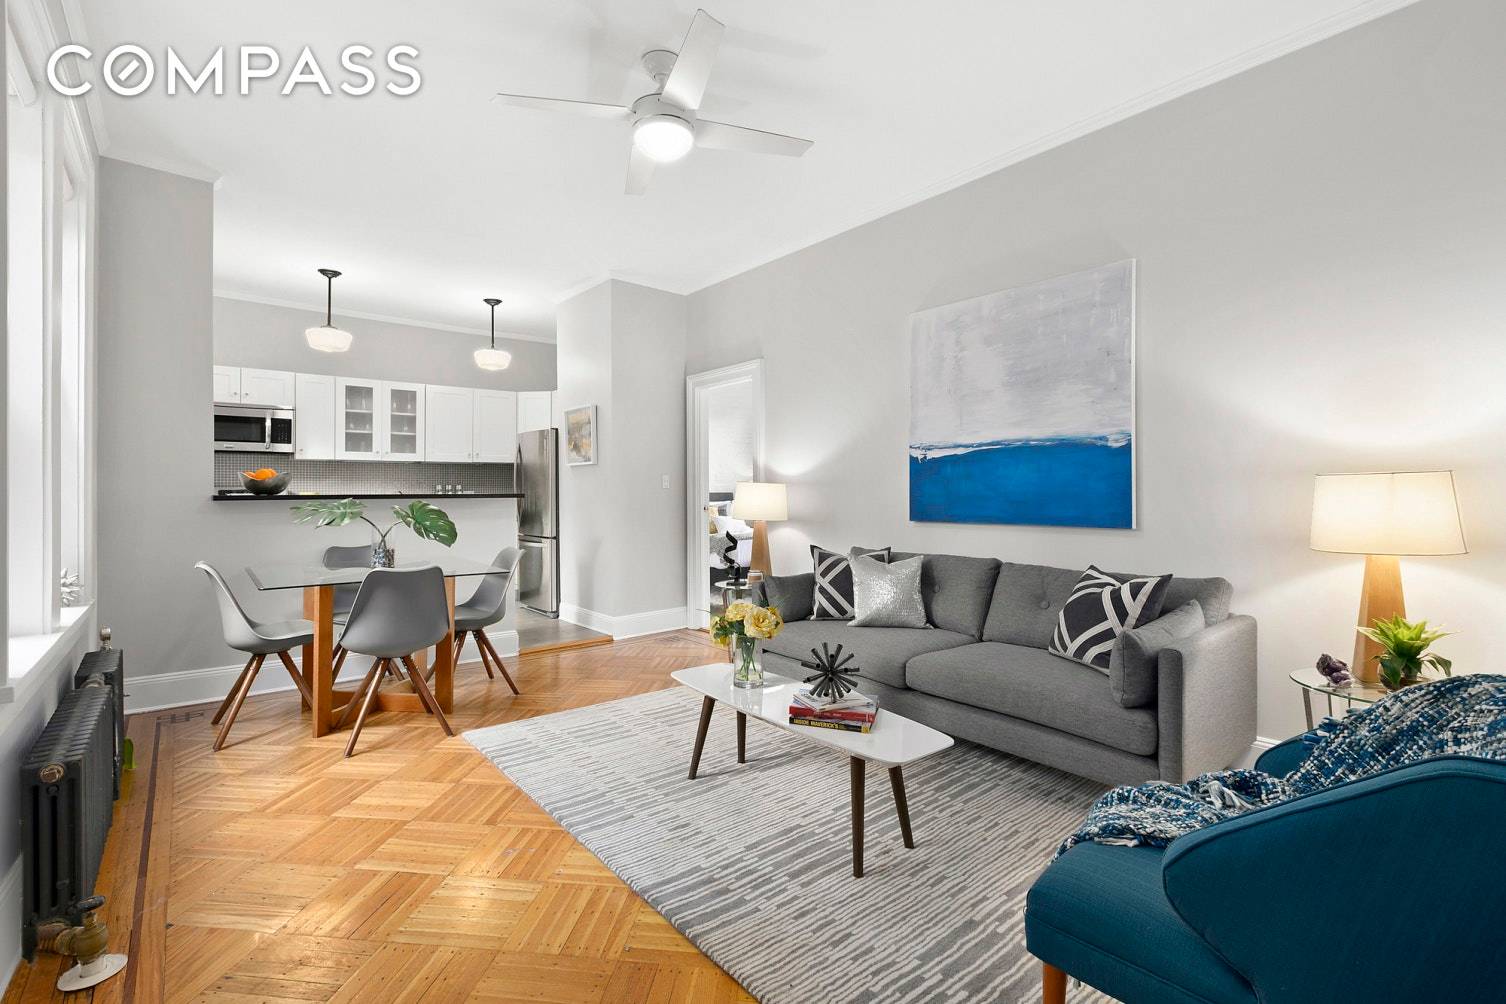 A beautifully renovated, charming, and quiet two bedroom home with tree top views awaits you in the heart of Prospect Heights.